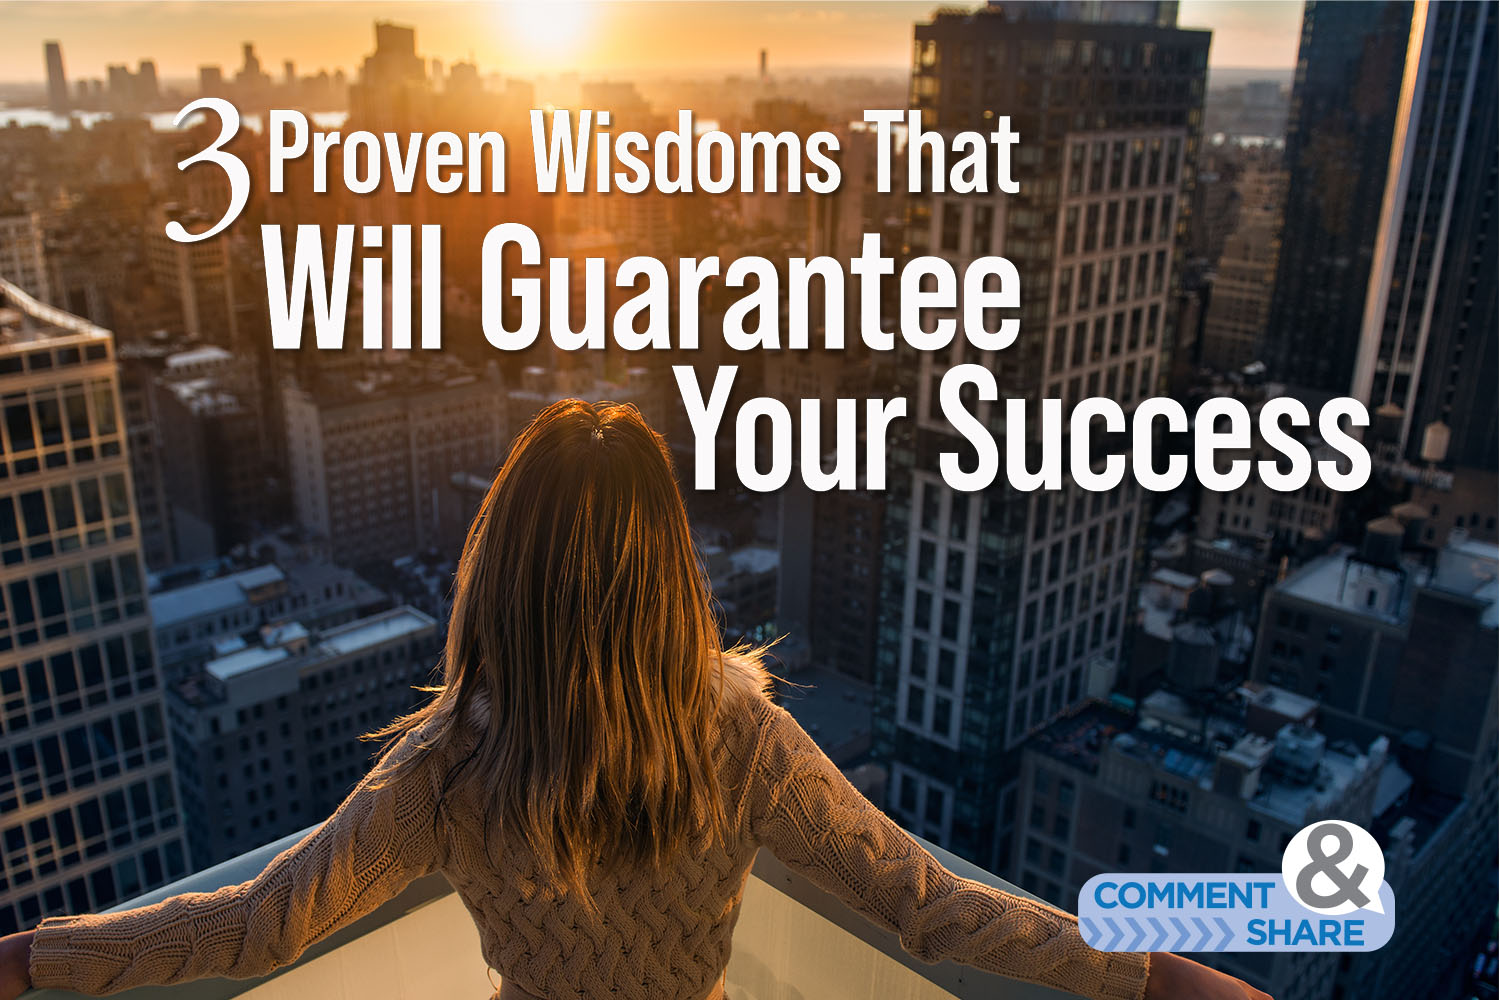 3 Proven Wisdoms That Will Guarantee Your Success